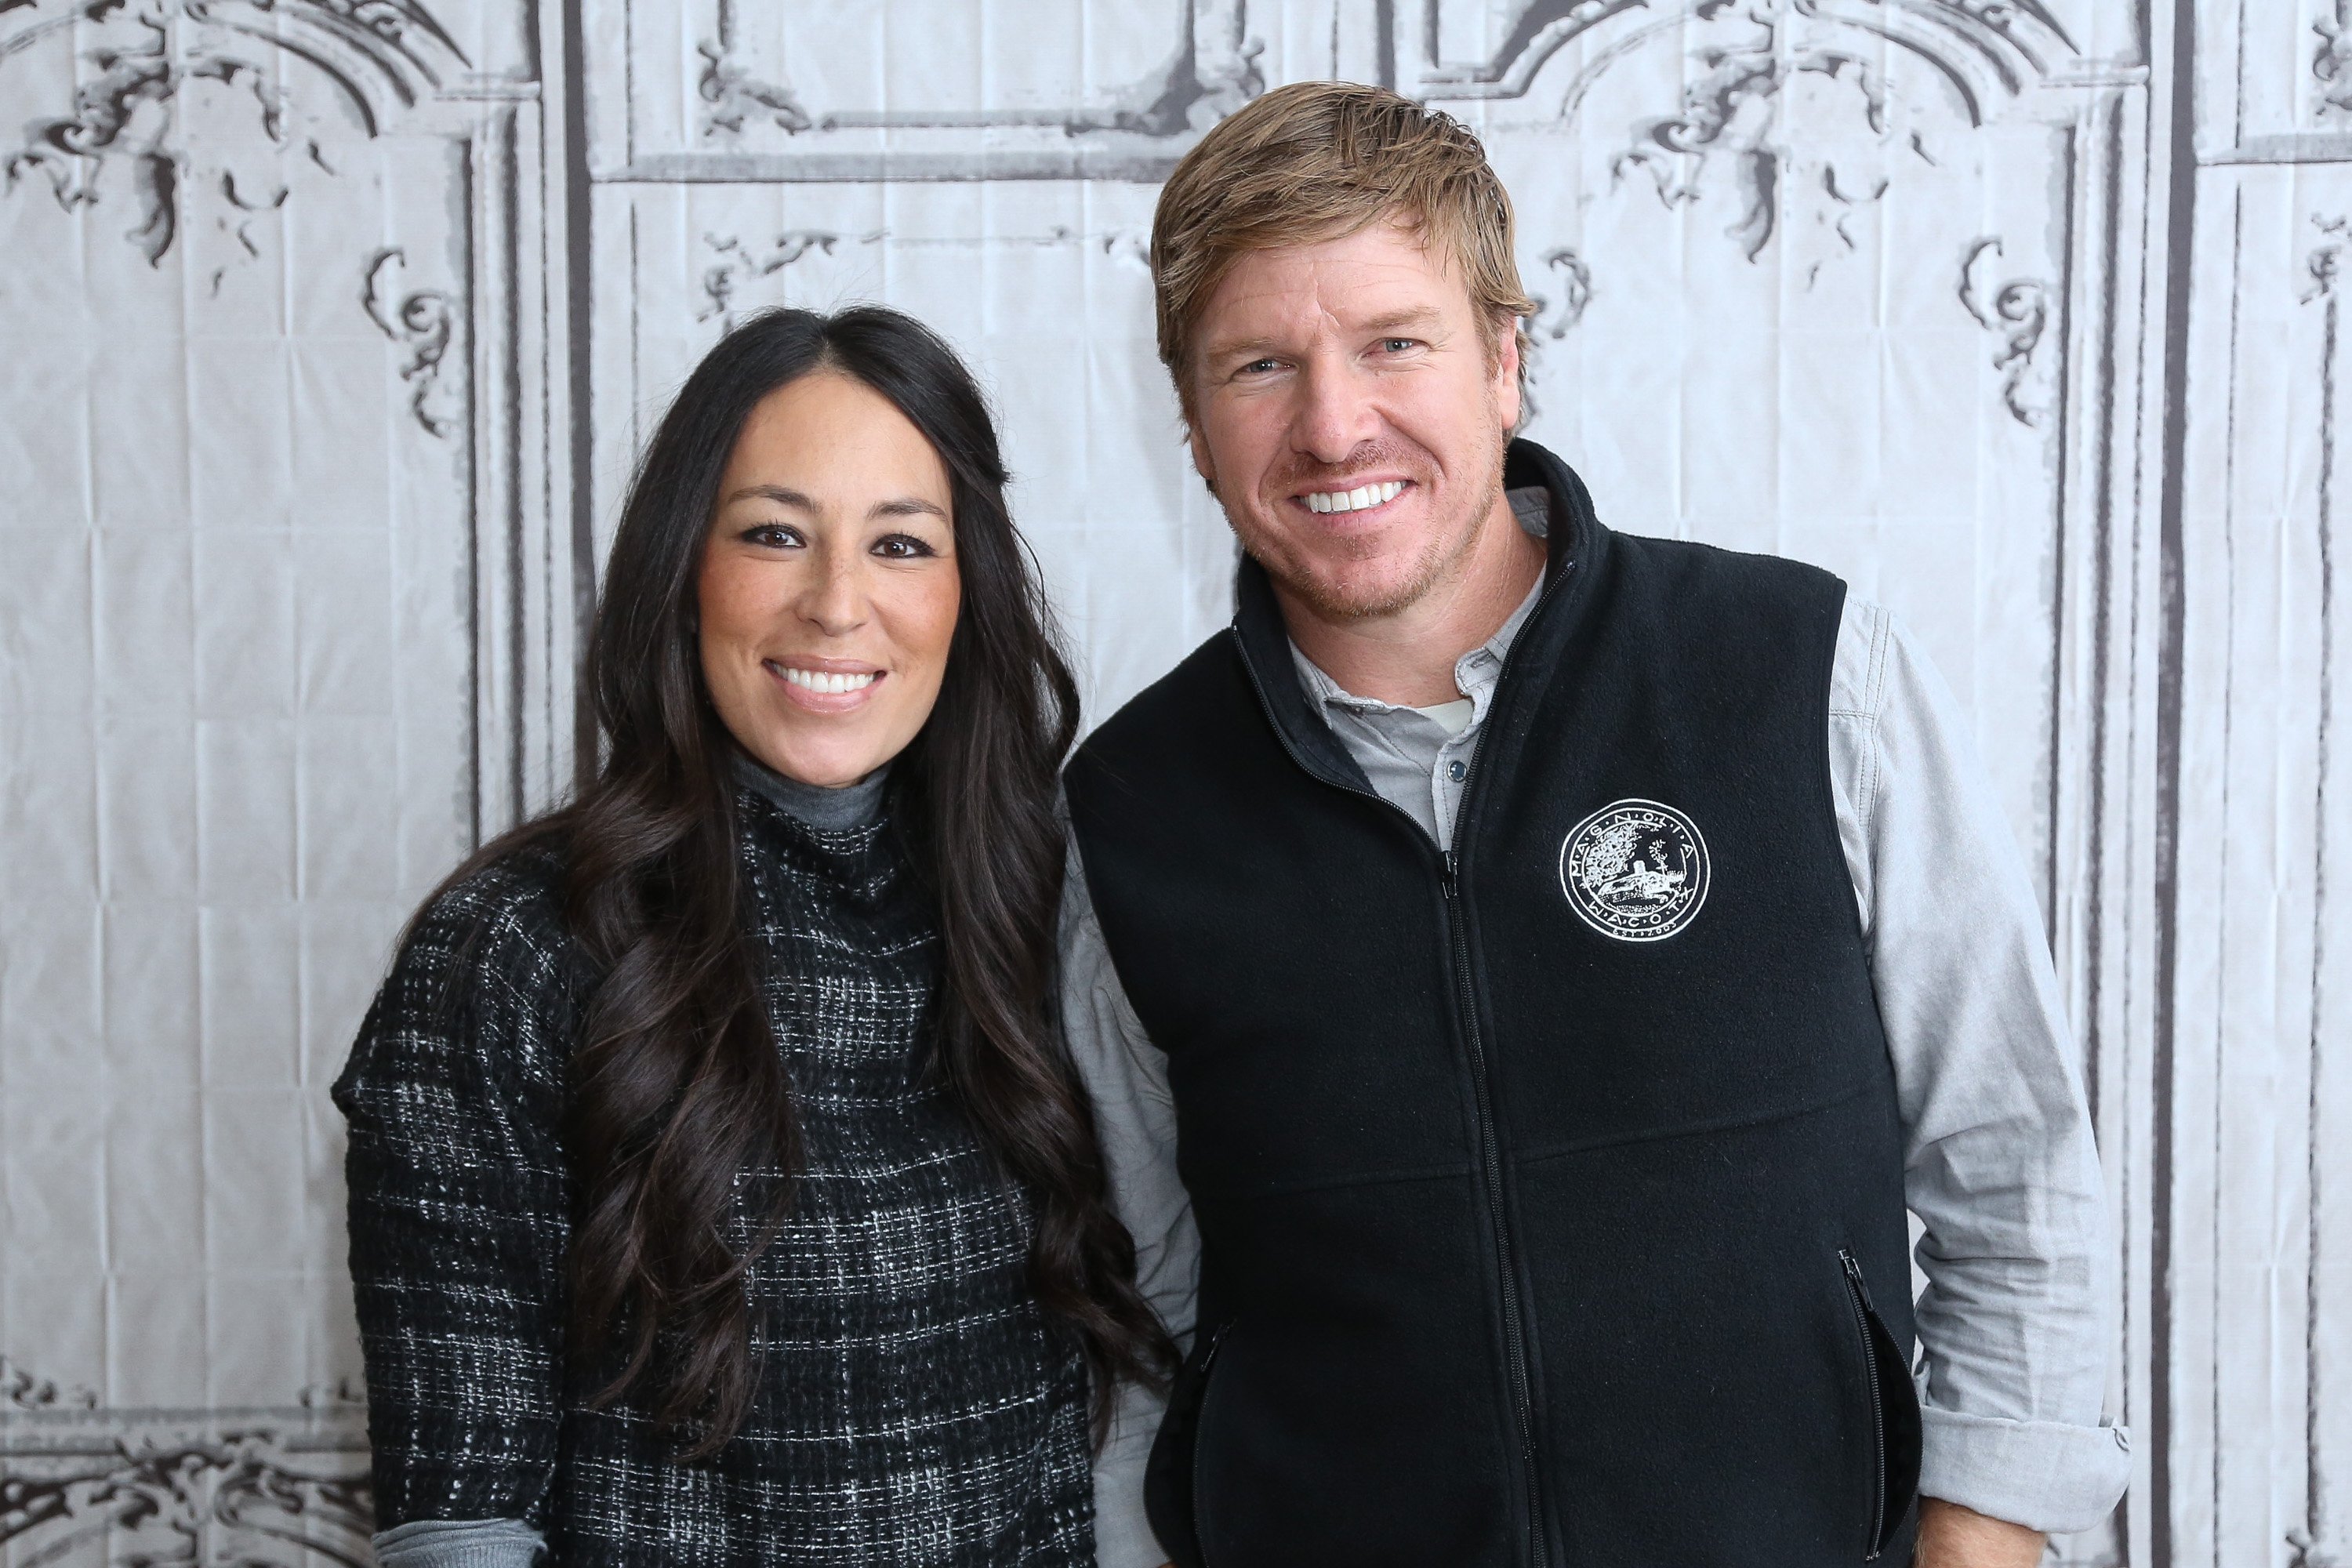 Chip Gaines and Joanna Gaines attend AOL Build Presents: "Fixer Upper" at AOL Studios In New York on December 8, 2015 in New York City | Photo: Getty Images